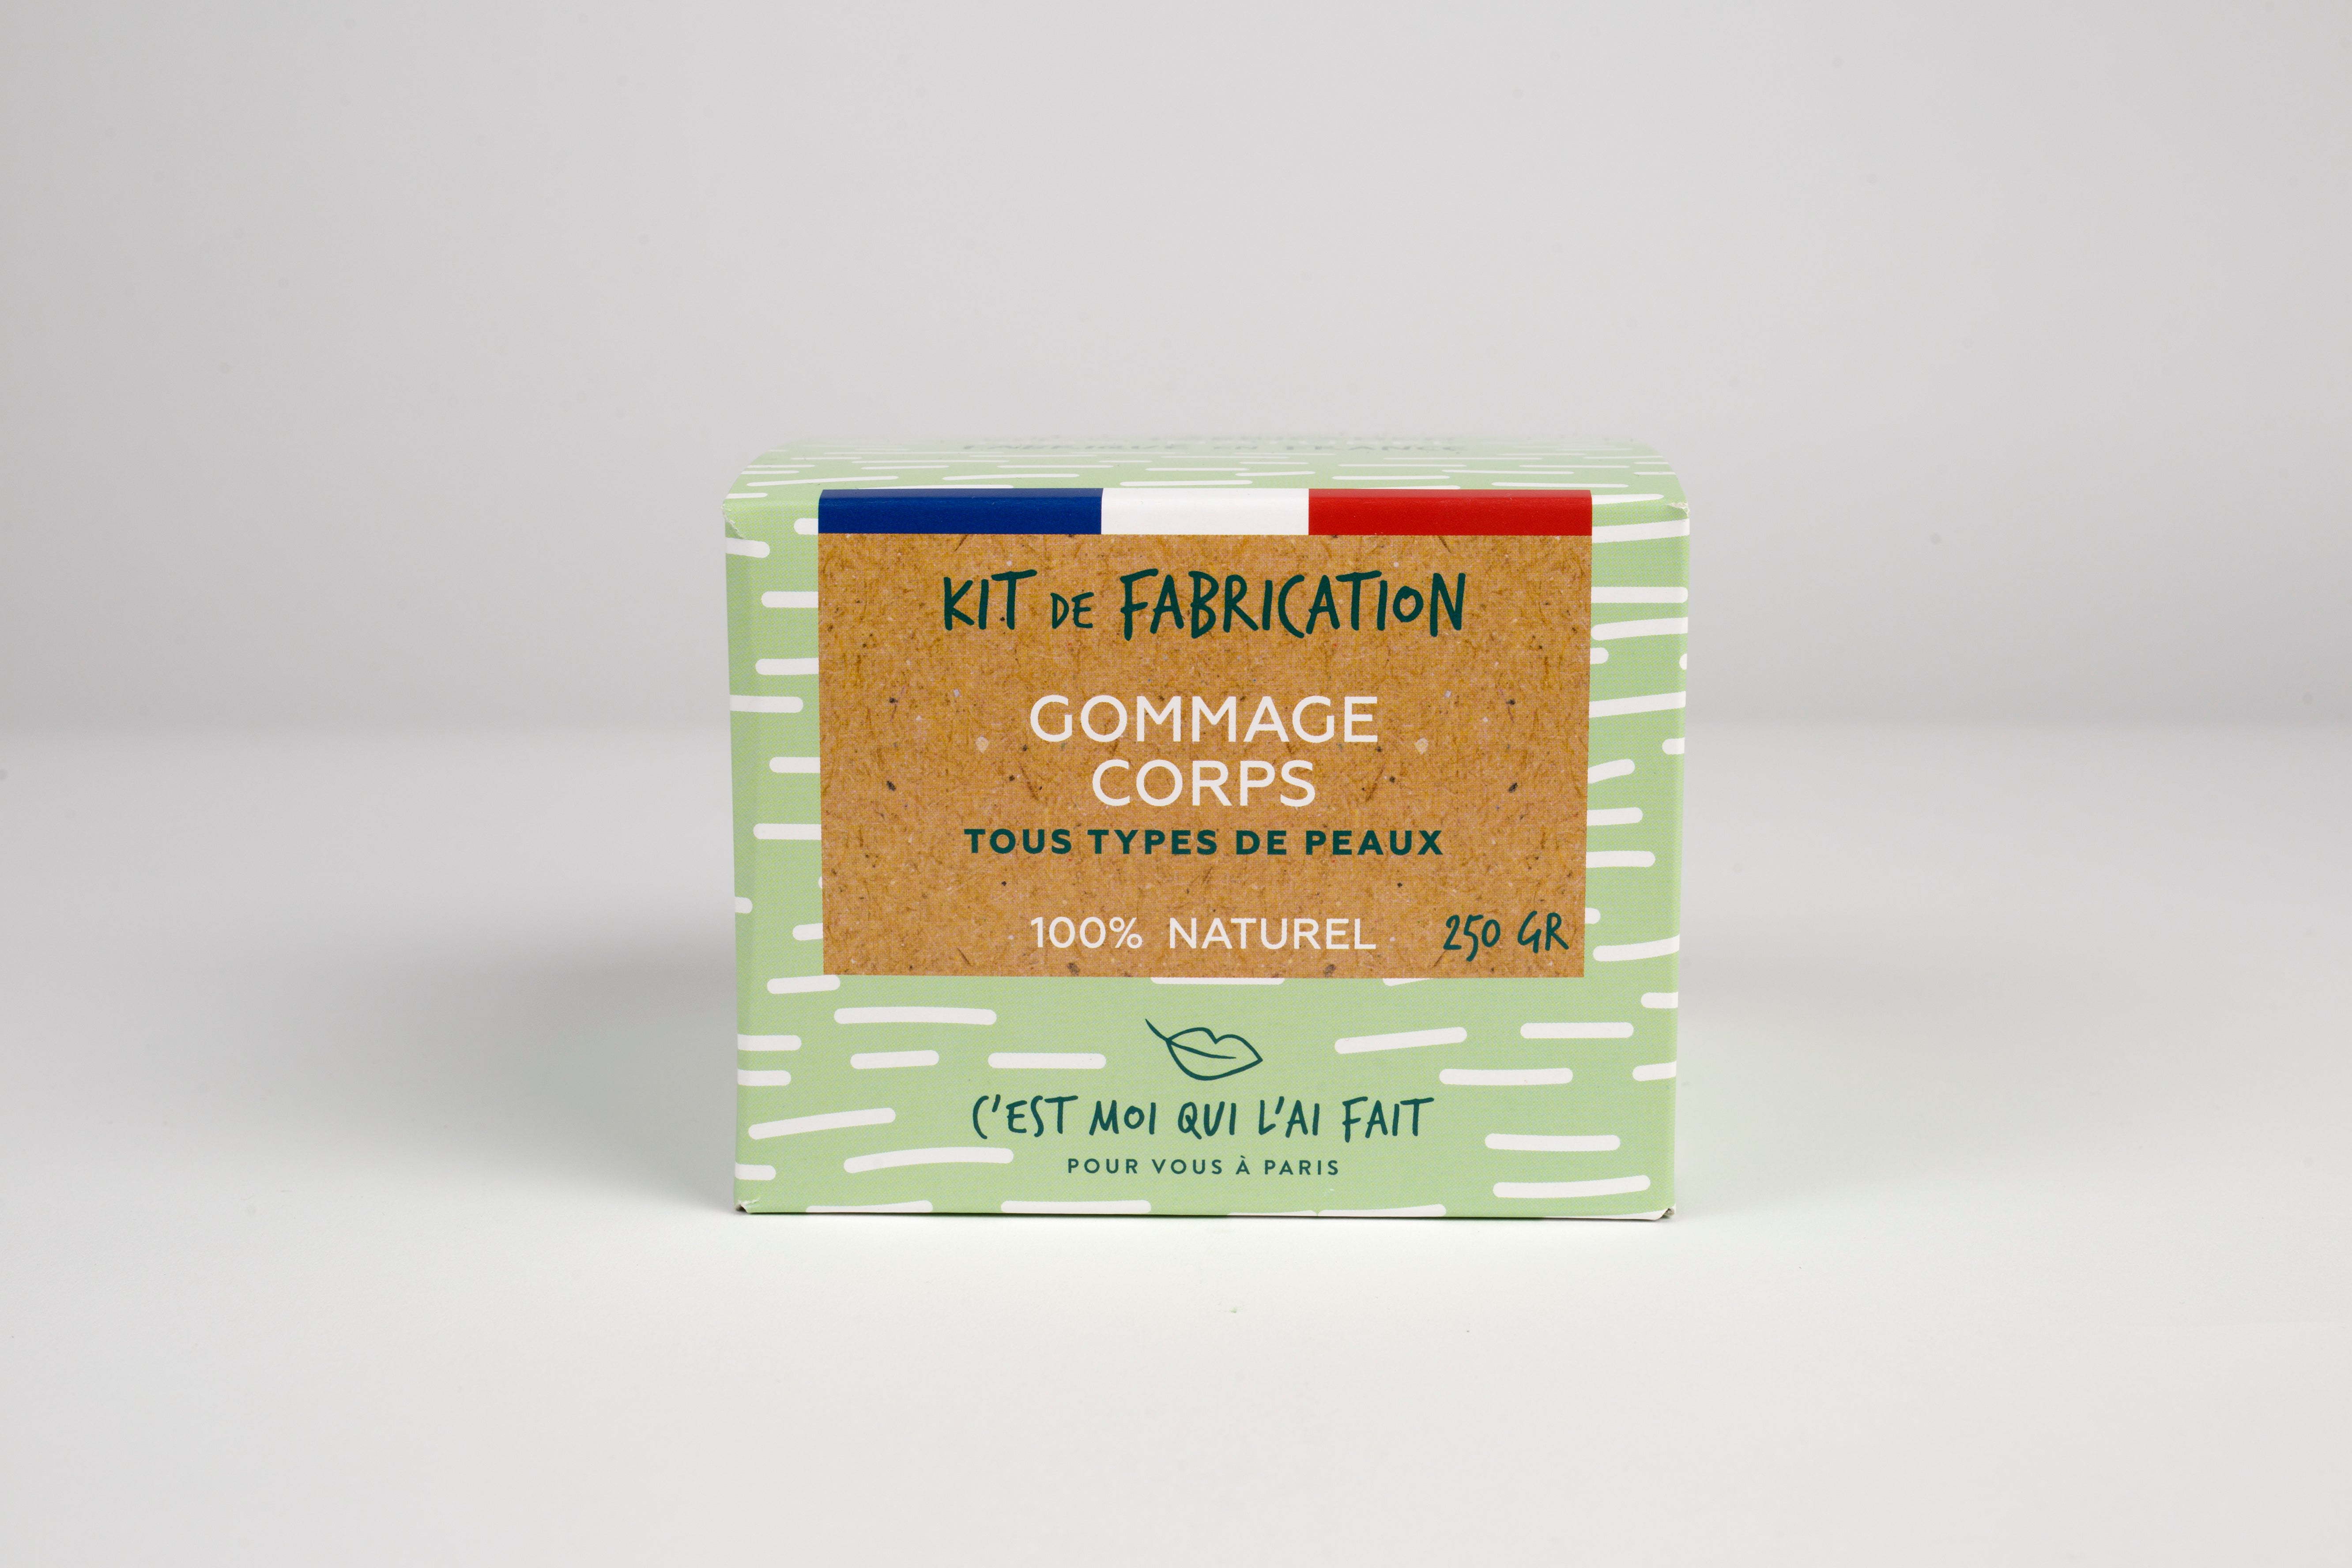 Kit de Fabrication - Gommage Corps